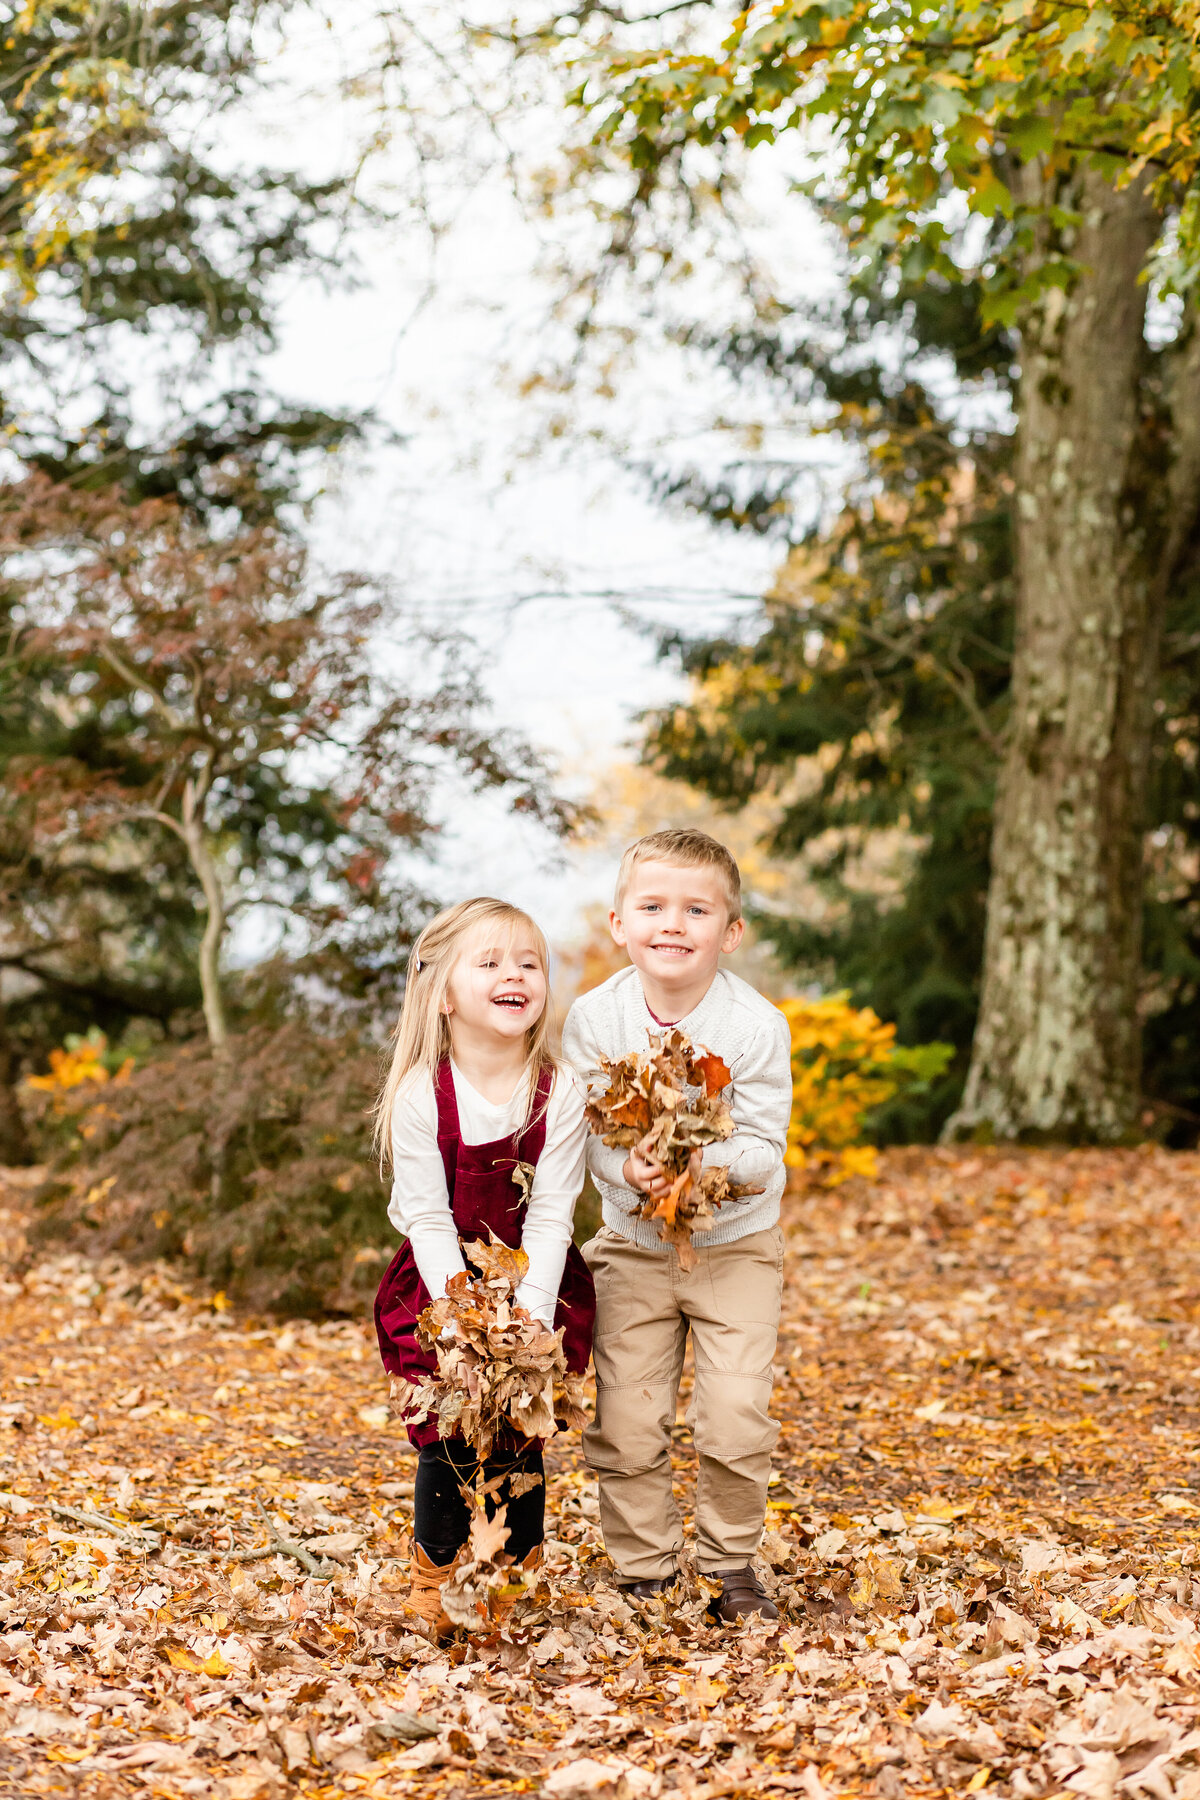 Kids throwing Fall leaves in the air